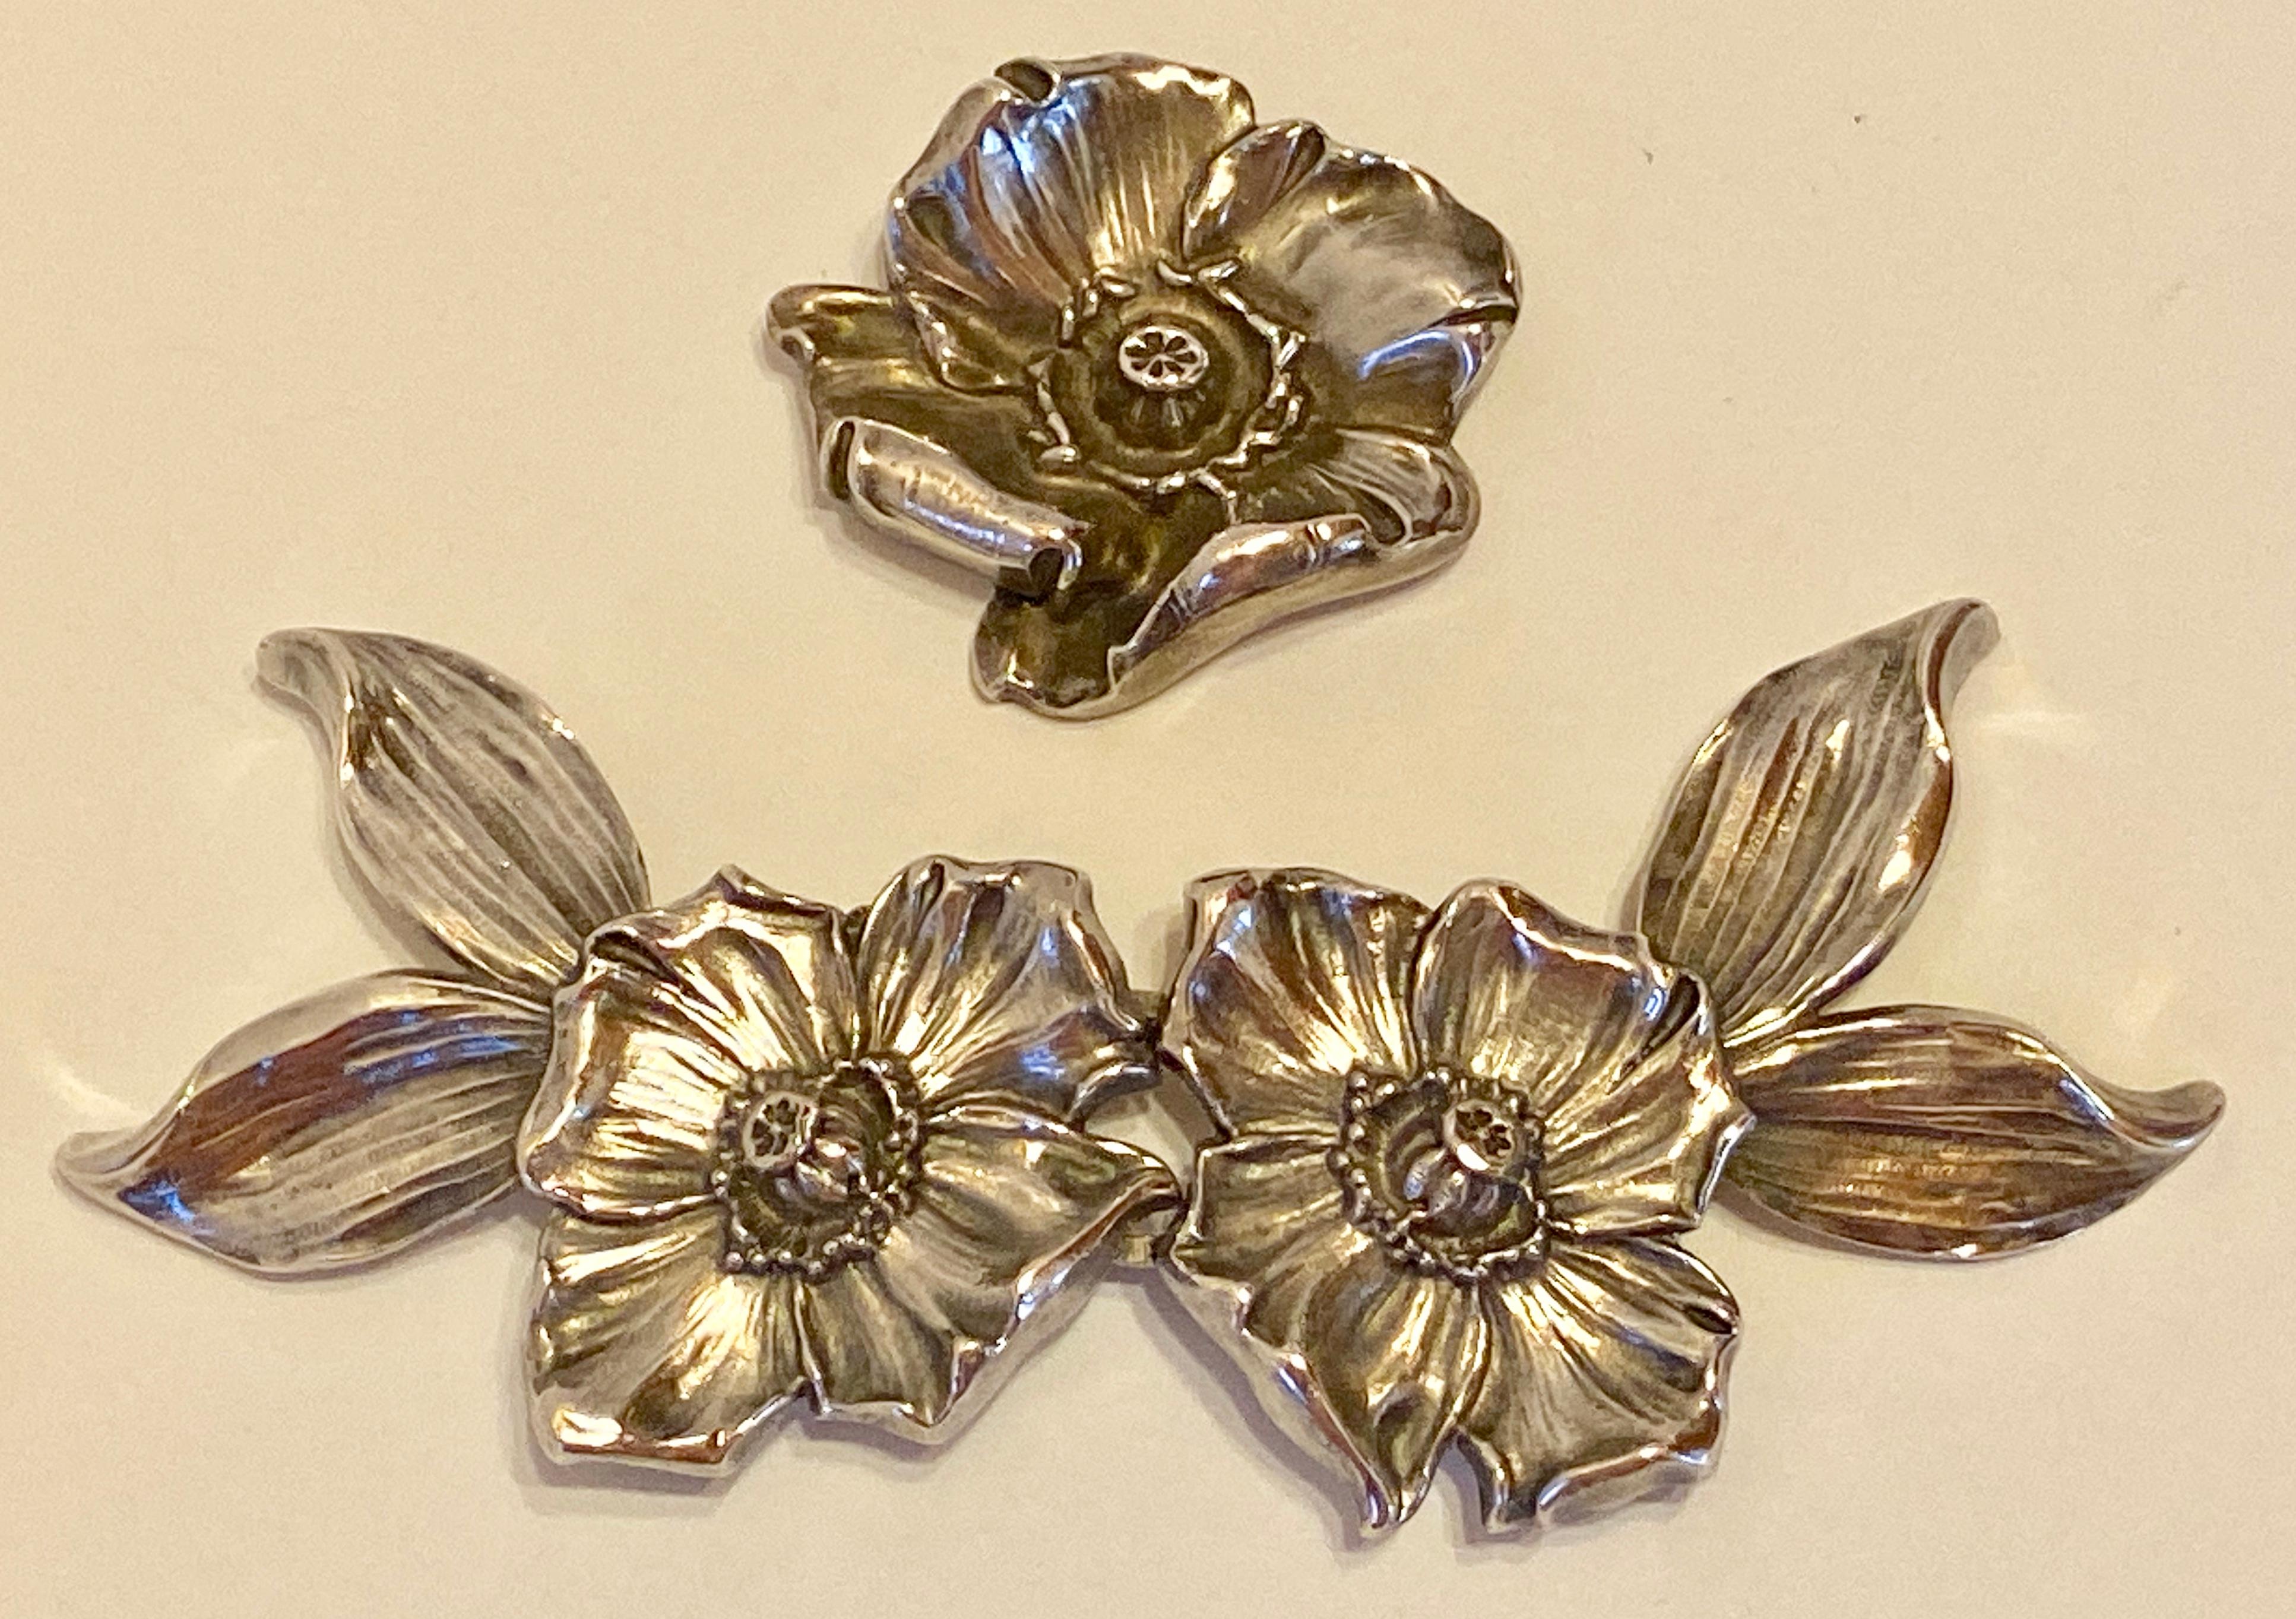      This wonderfully detailed Victorian sterling silver floral 2-Piece belt buckle with a matching floral sterling silver brooch. The 2-piece floral belt buckle measures 5 inches in length (when put together), 2 inches in width (or height), and 1/2